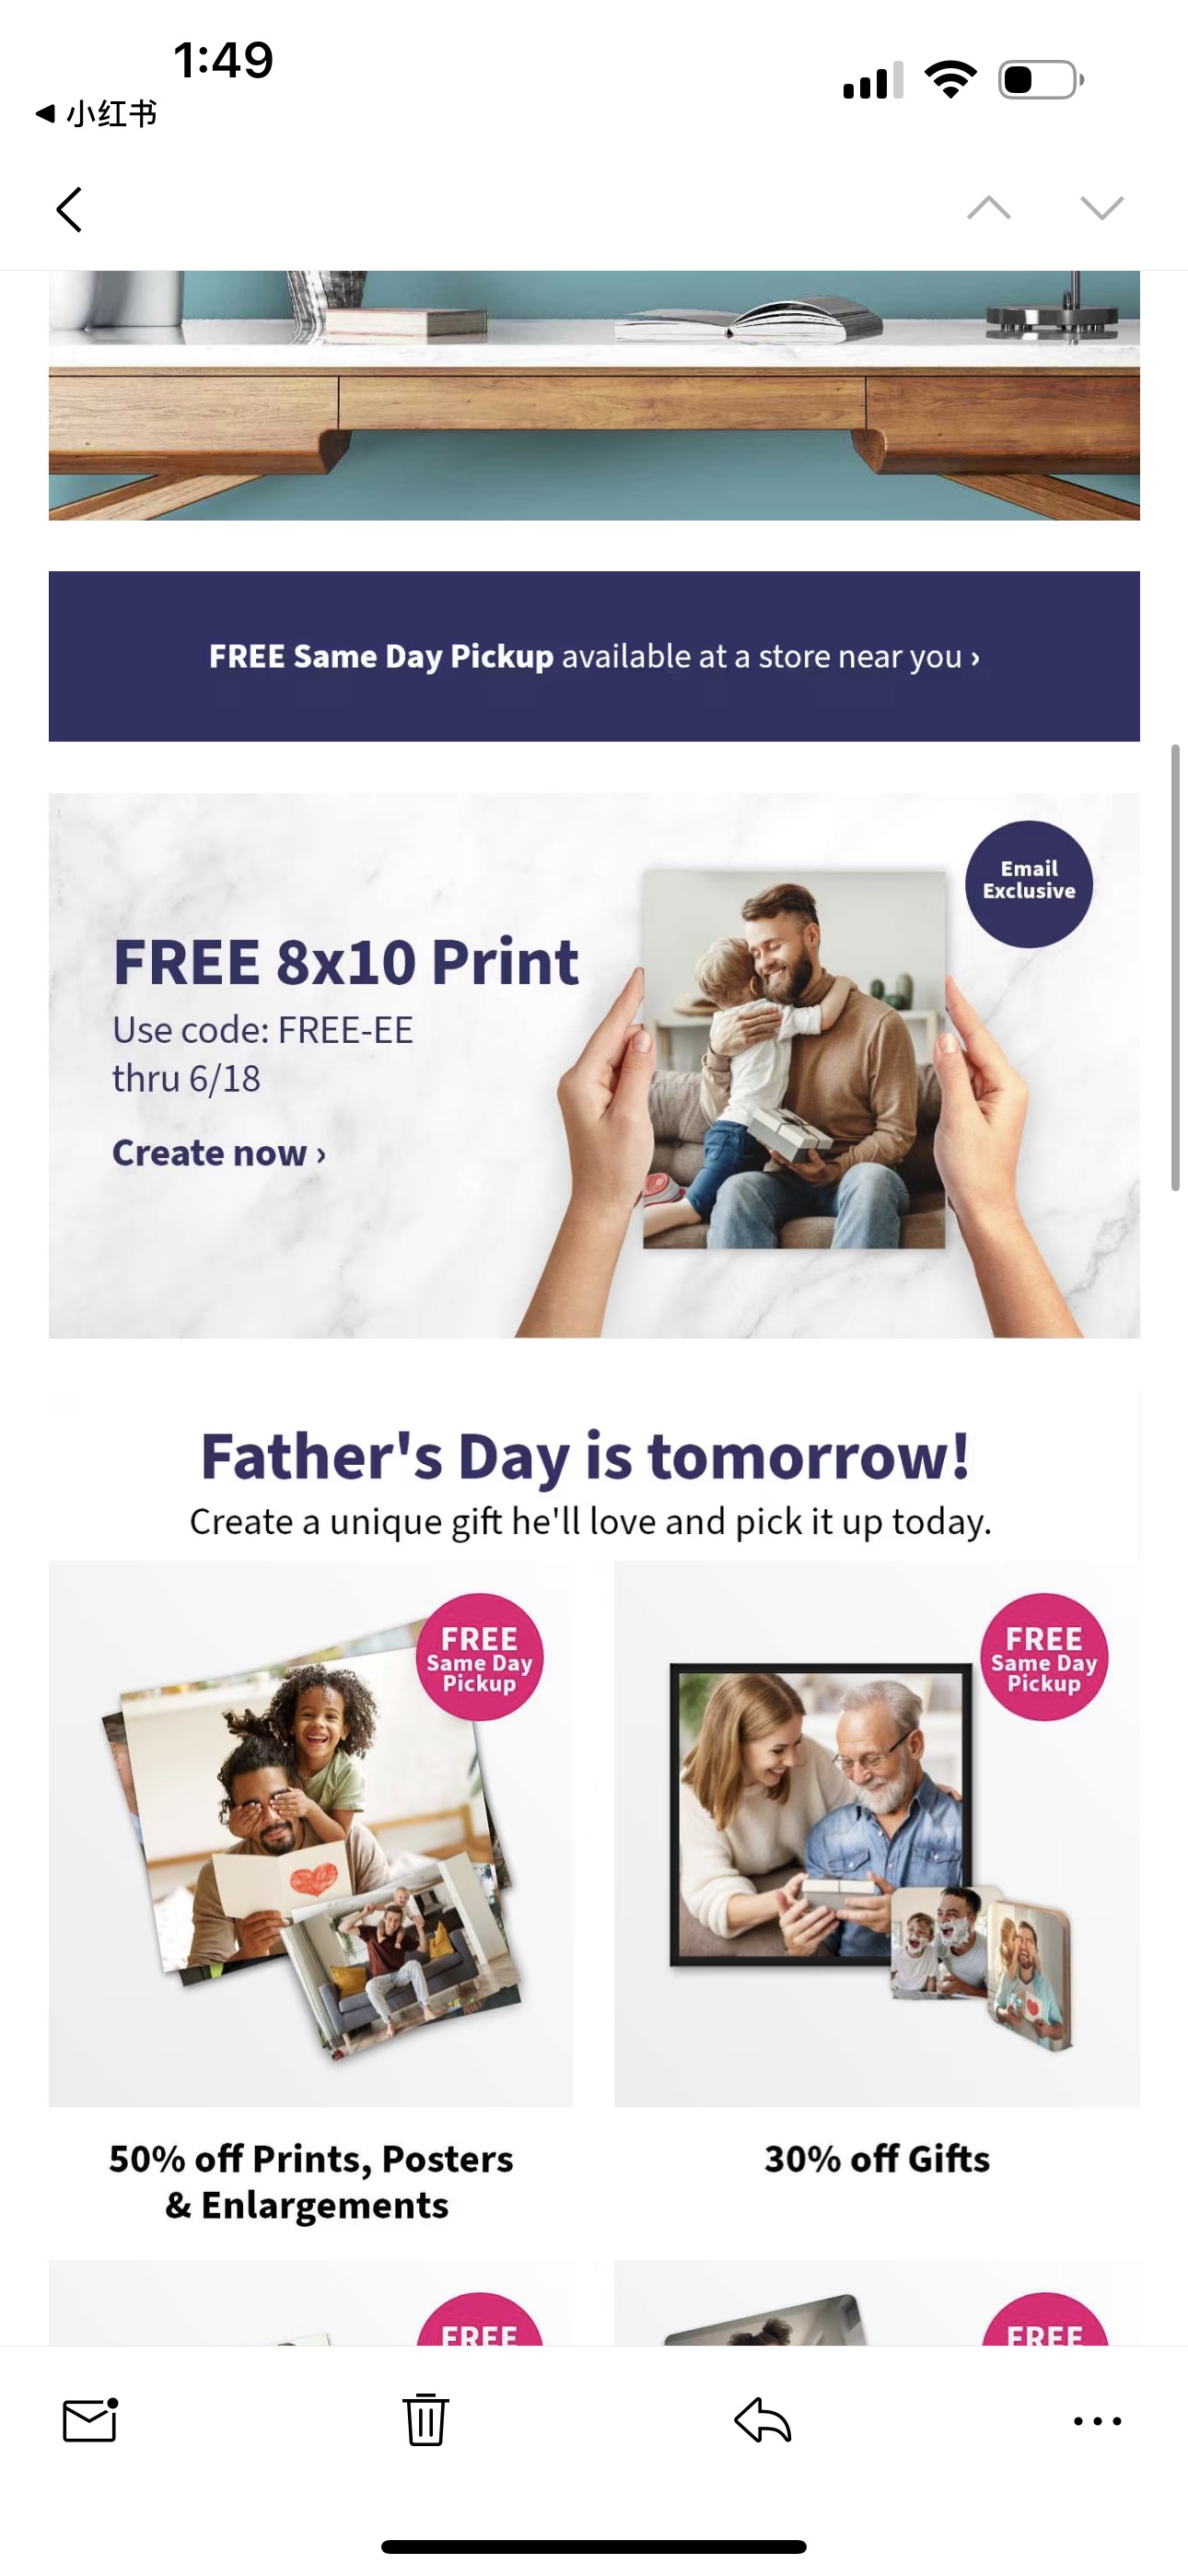 Photo Prints, Custom Cards, and Posters | Walgreens Photo